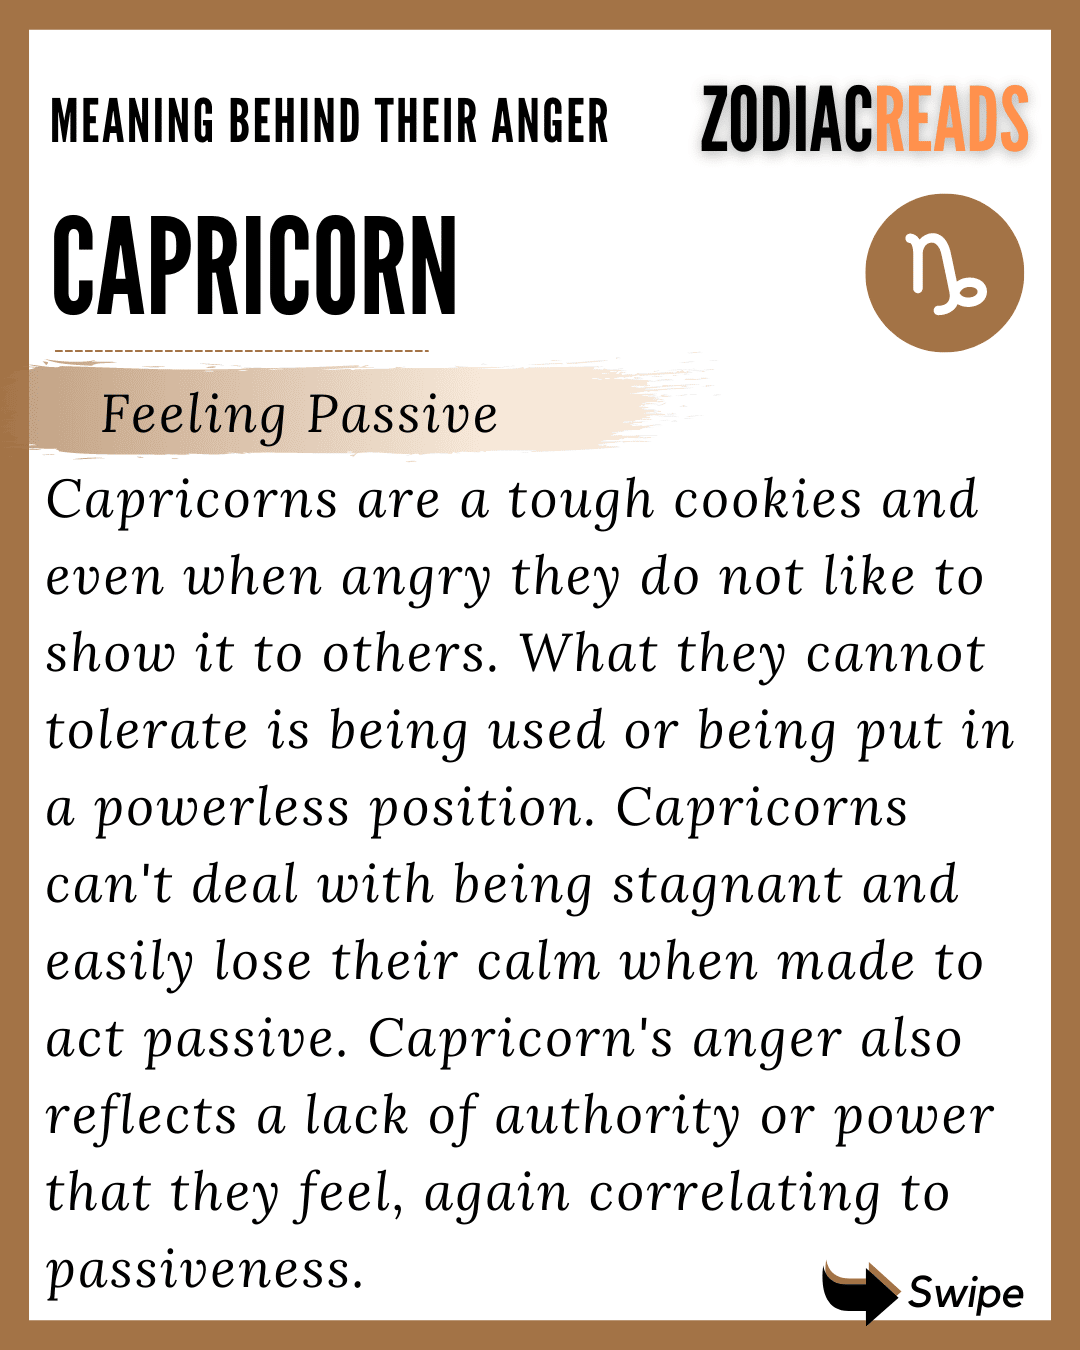 when capricorn is angry